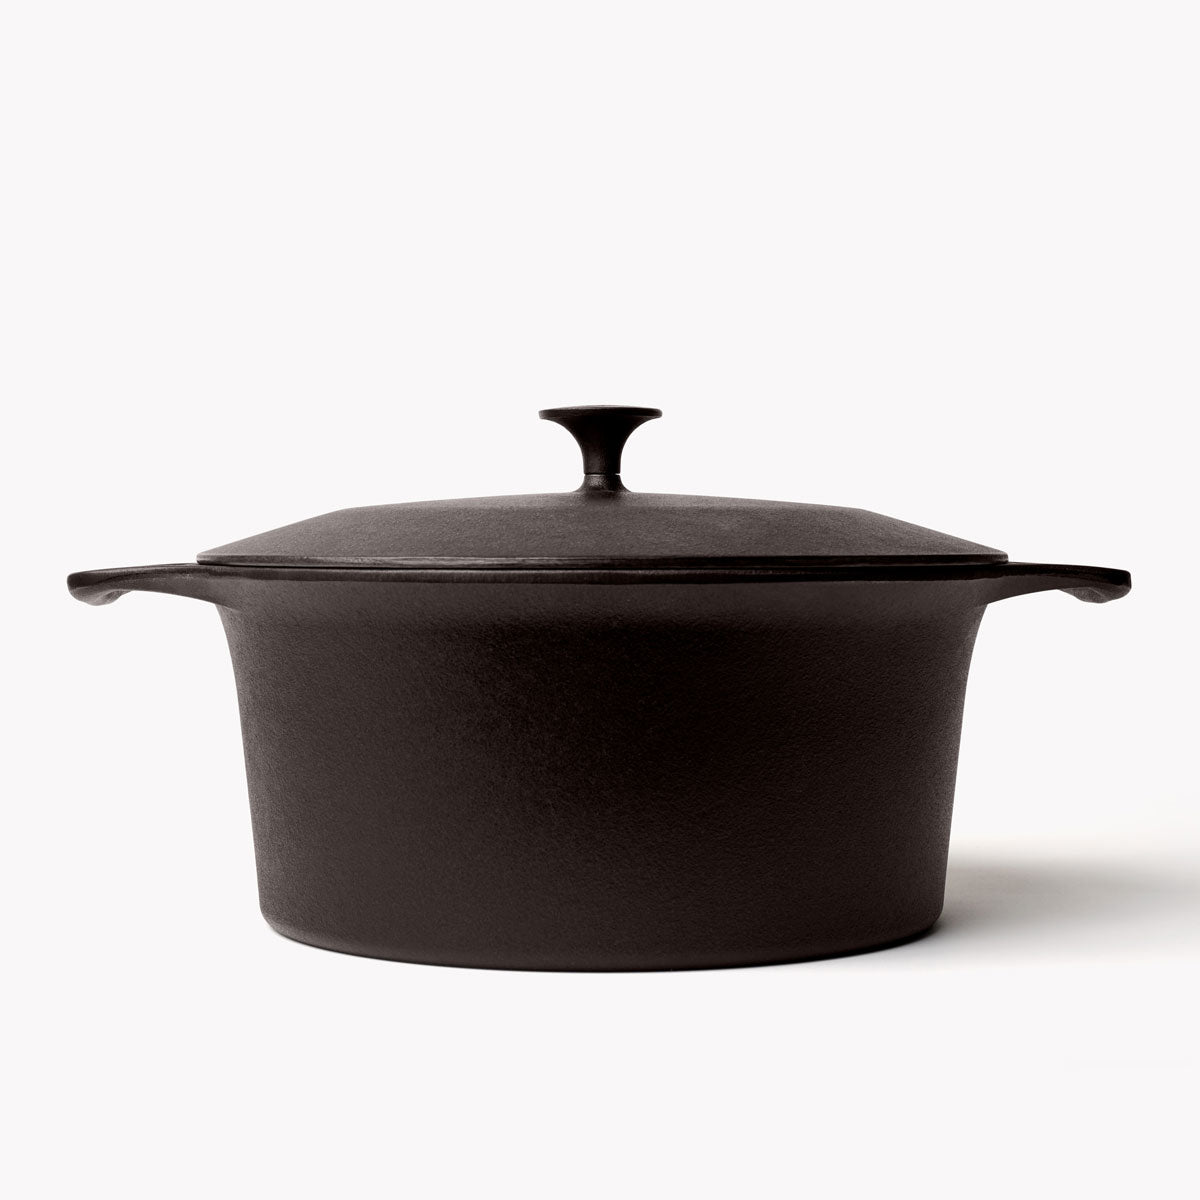 How We Designed Our Dutch Oven – Field Company